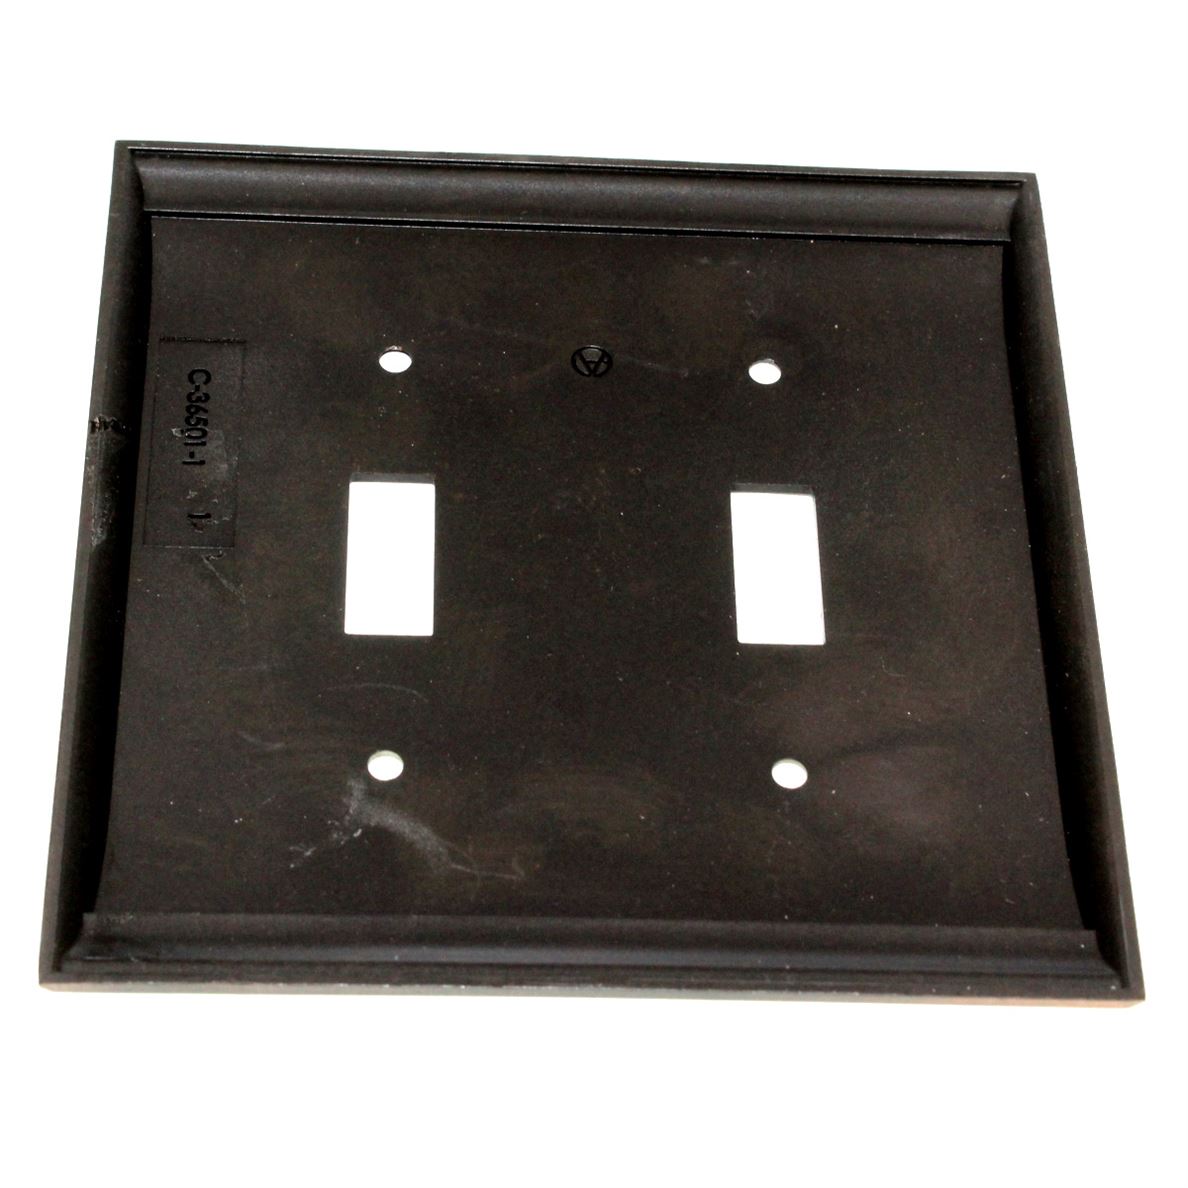 Amerock Candler Oil-Rubbed Bronze 2 Toggle Light Switch Wall Plate BP36501ORB